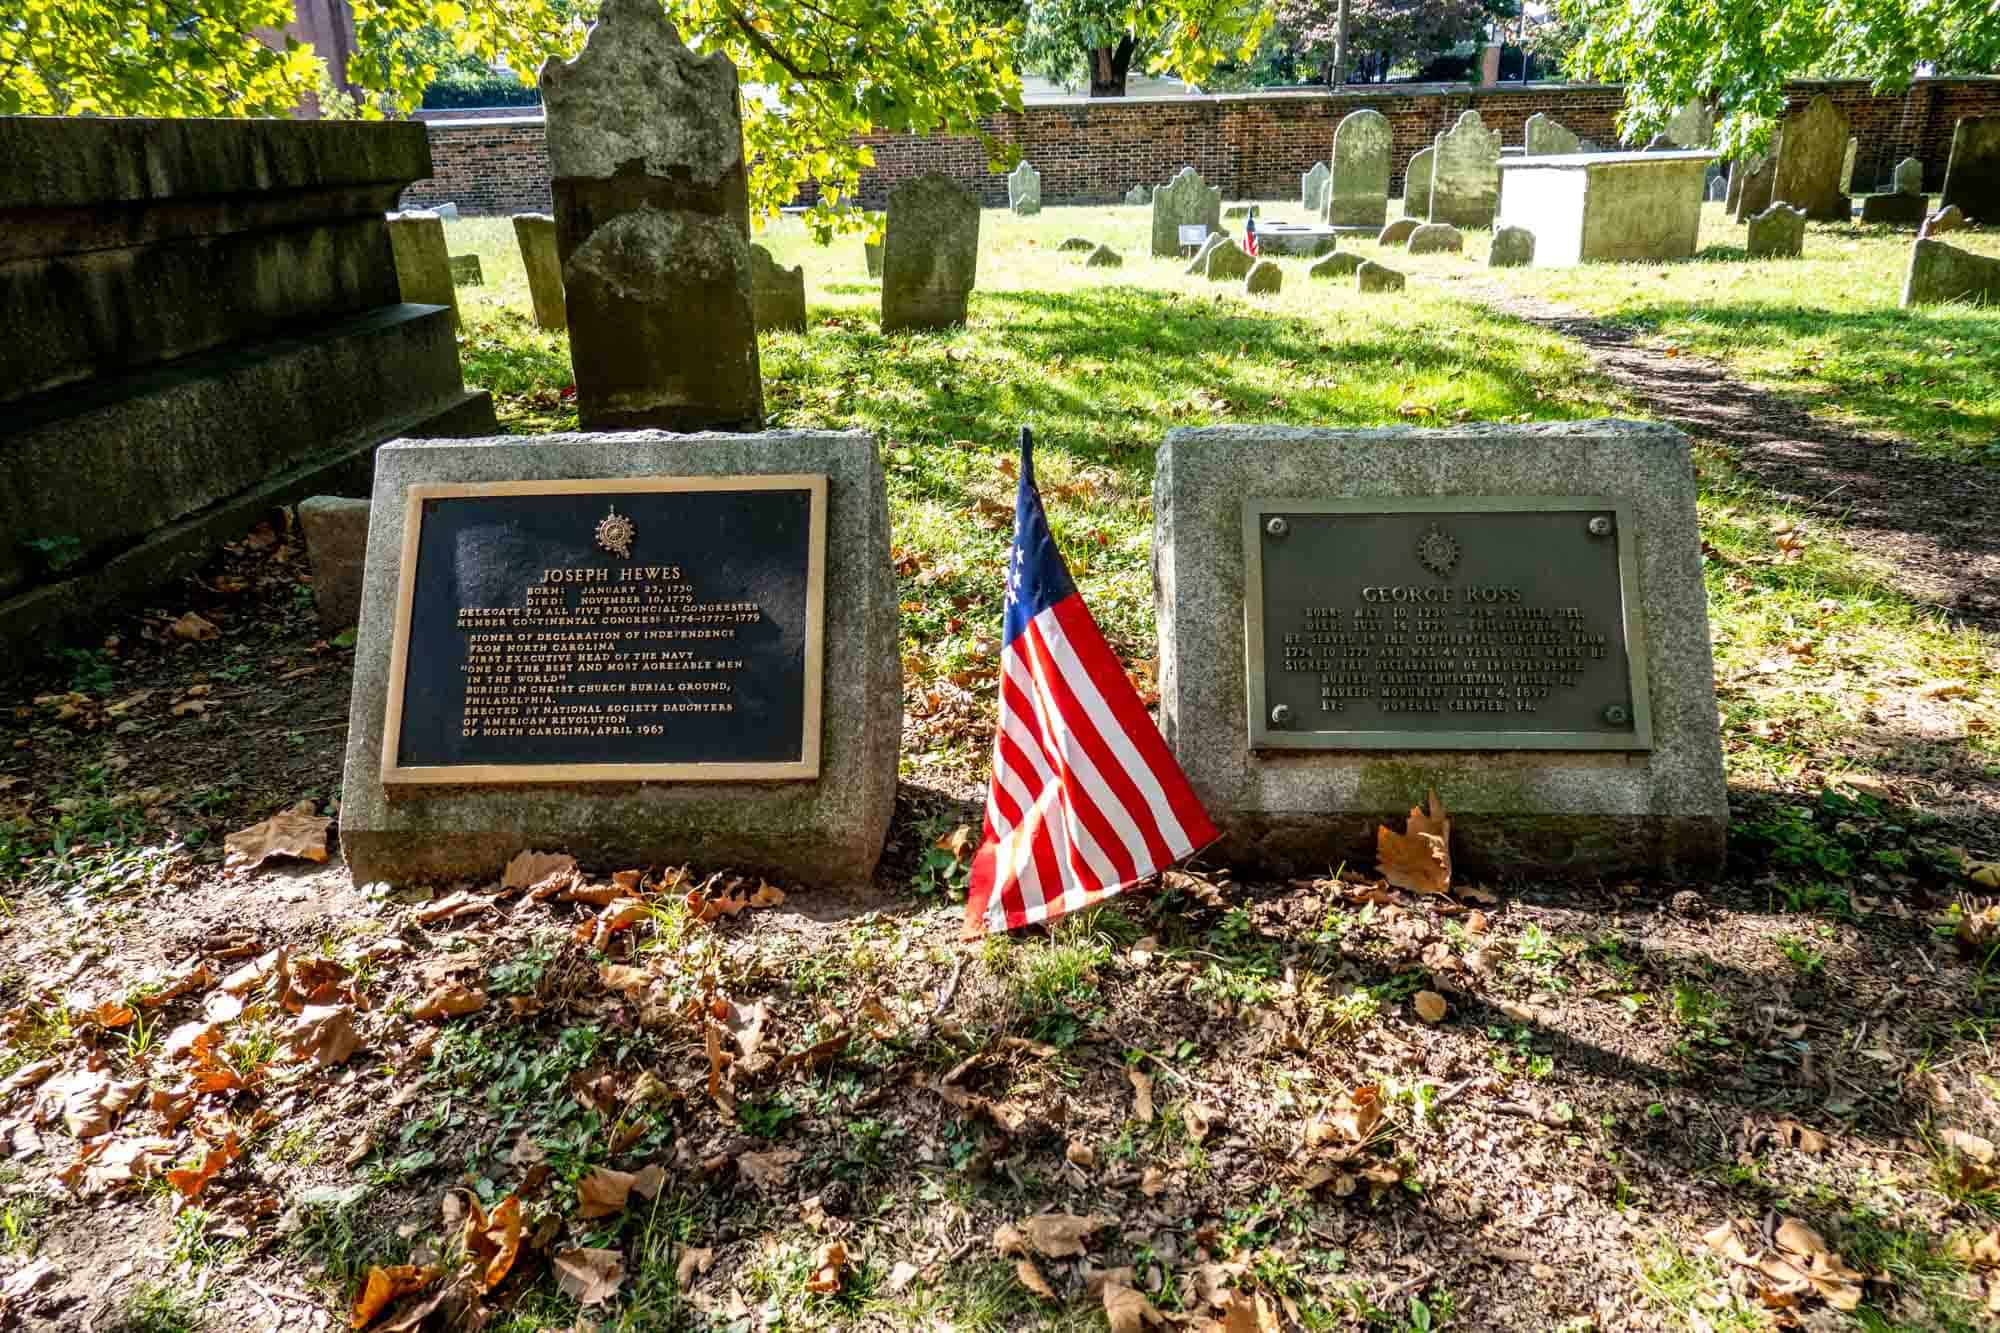 Two headstones with plaques for Joseph Hewes and George Ross with a Colonial flag